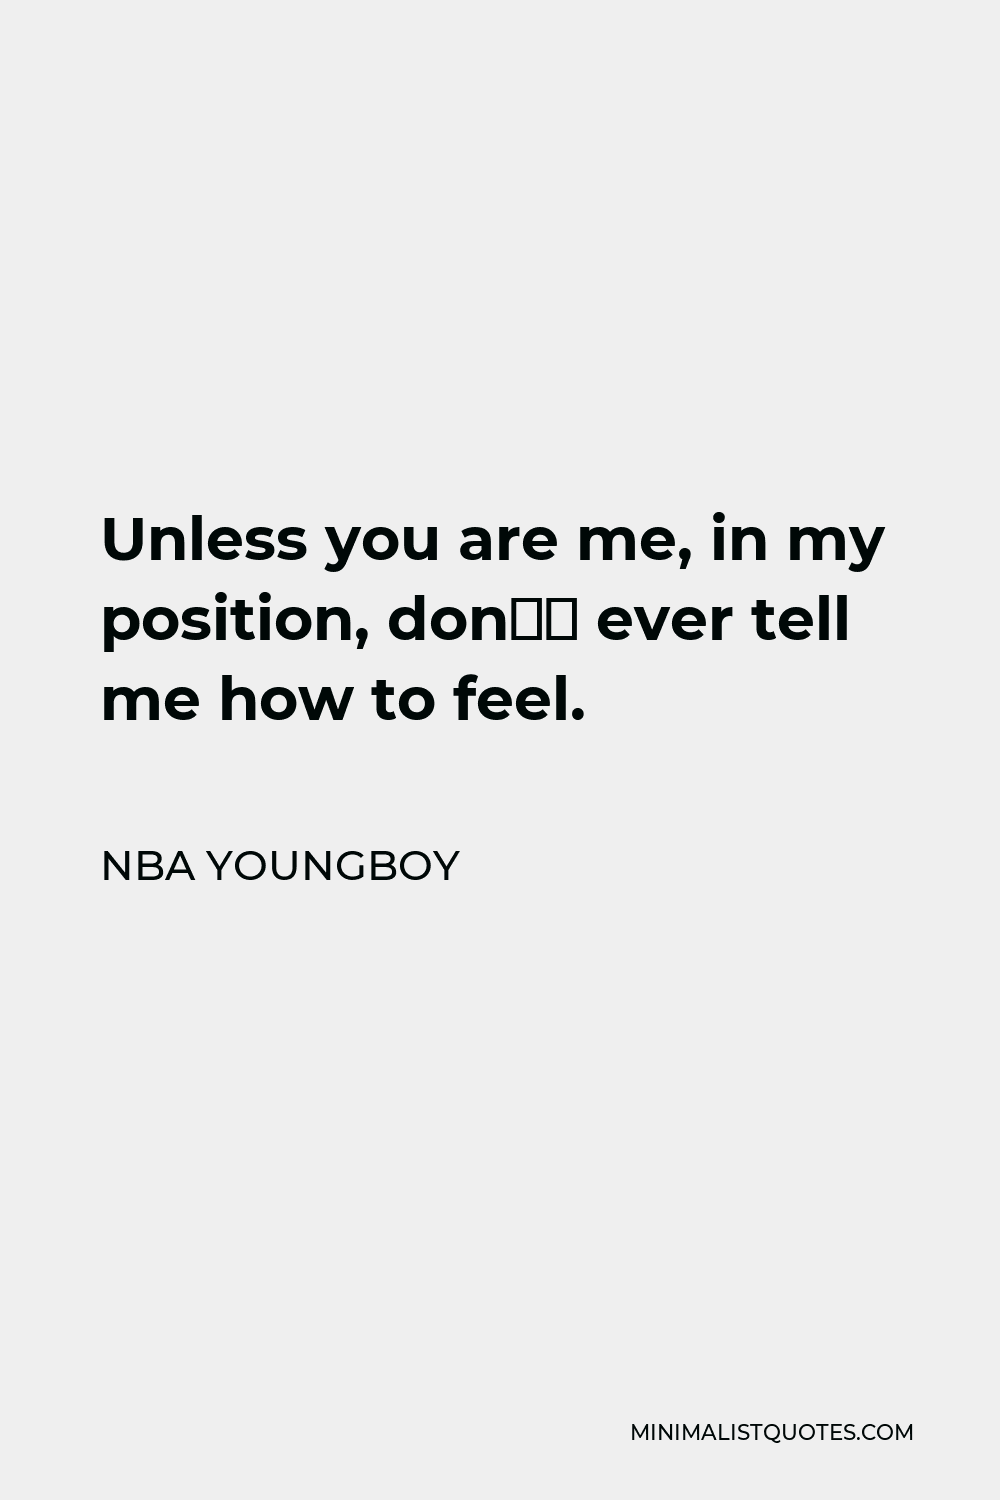 NBA Youngboy Quote - Unless you are me, in my position, don’t ever tell me how to feel.